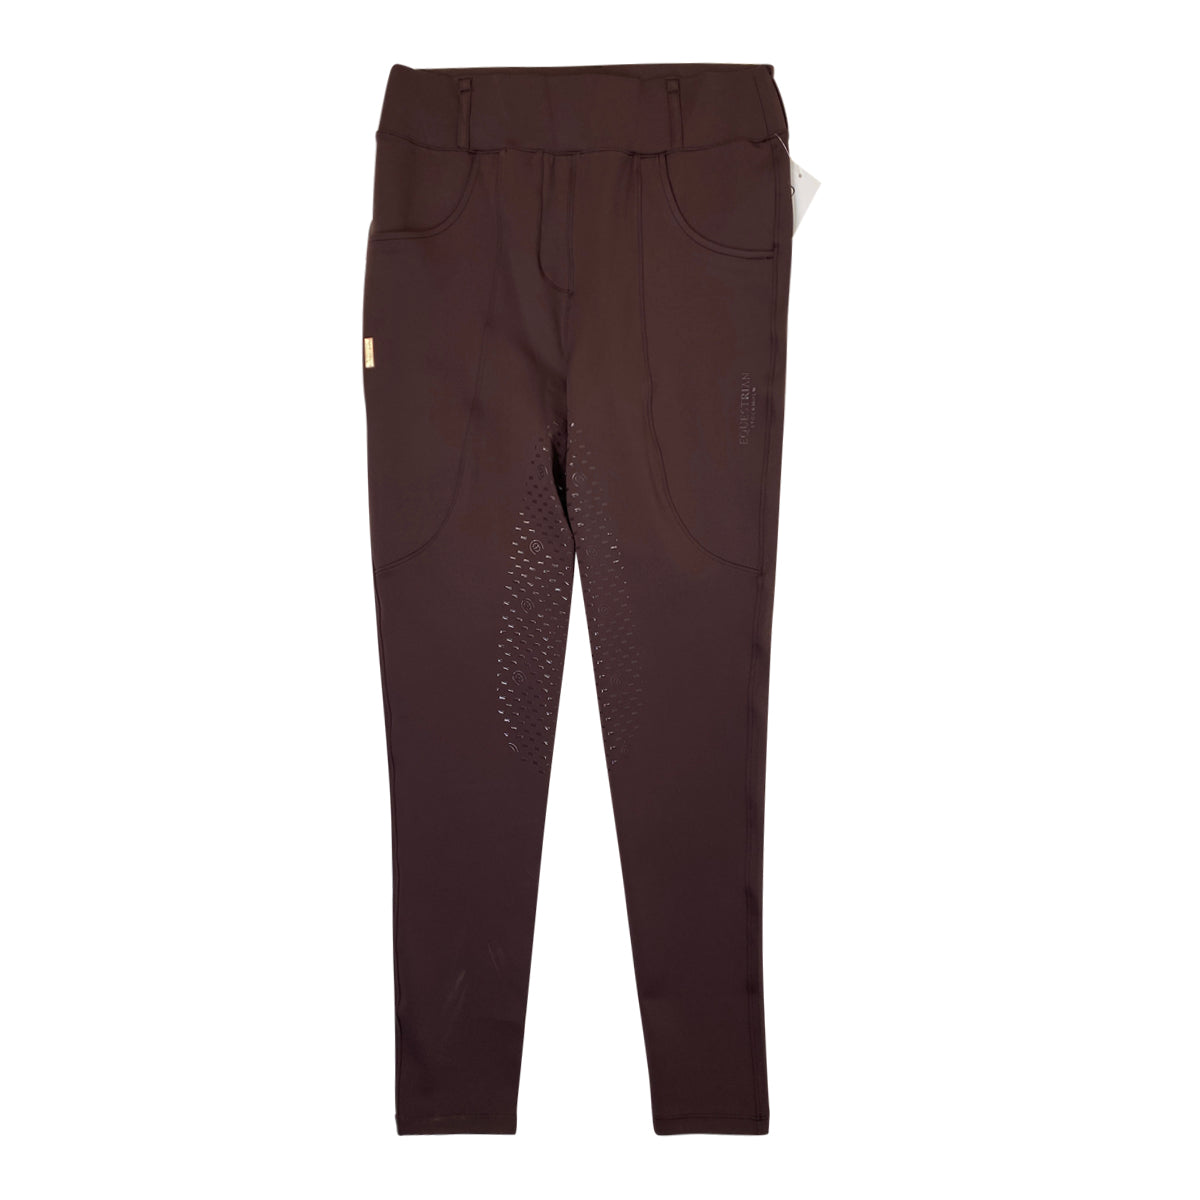 Equestrian Stockholm 'Moonless Night' Compression Full Seat Breeches  in Brownstone